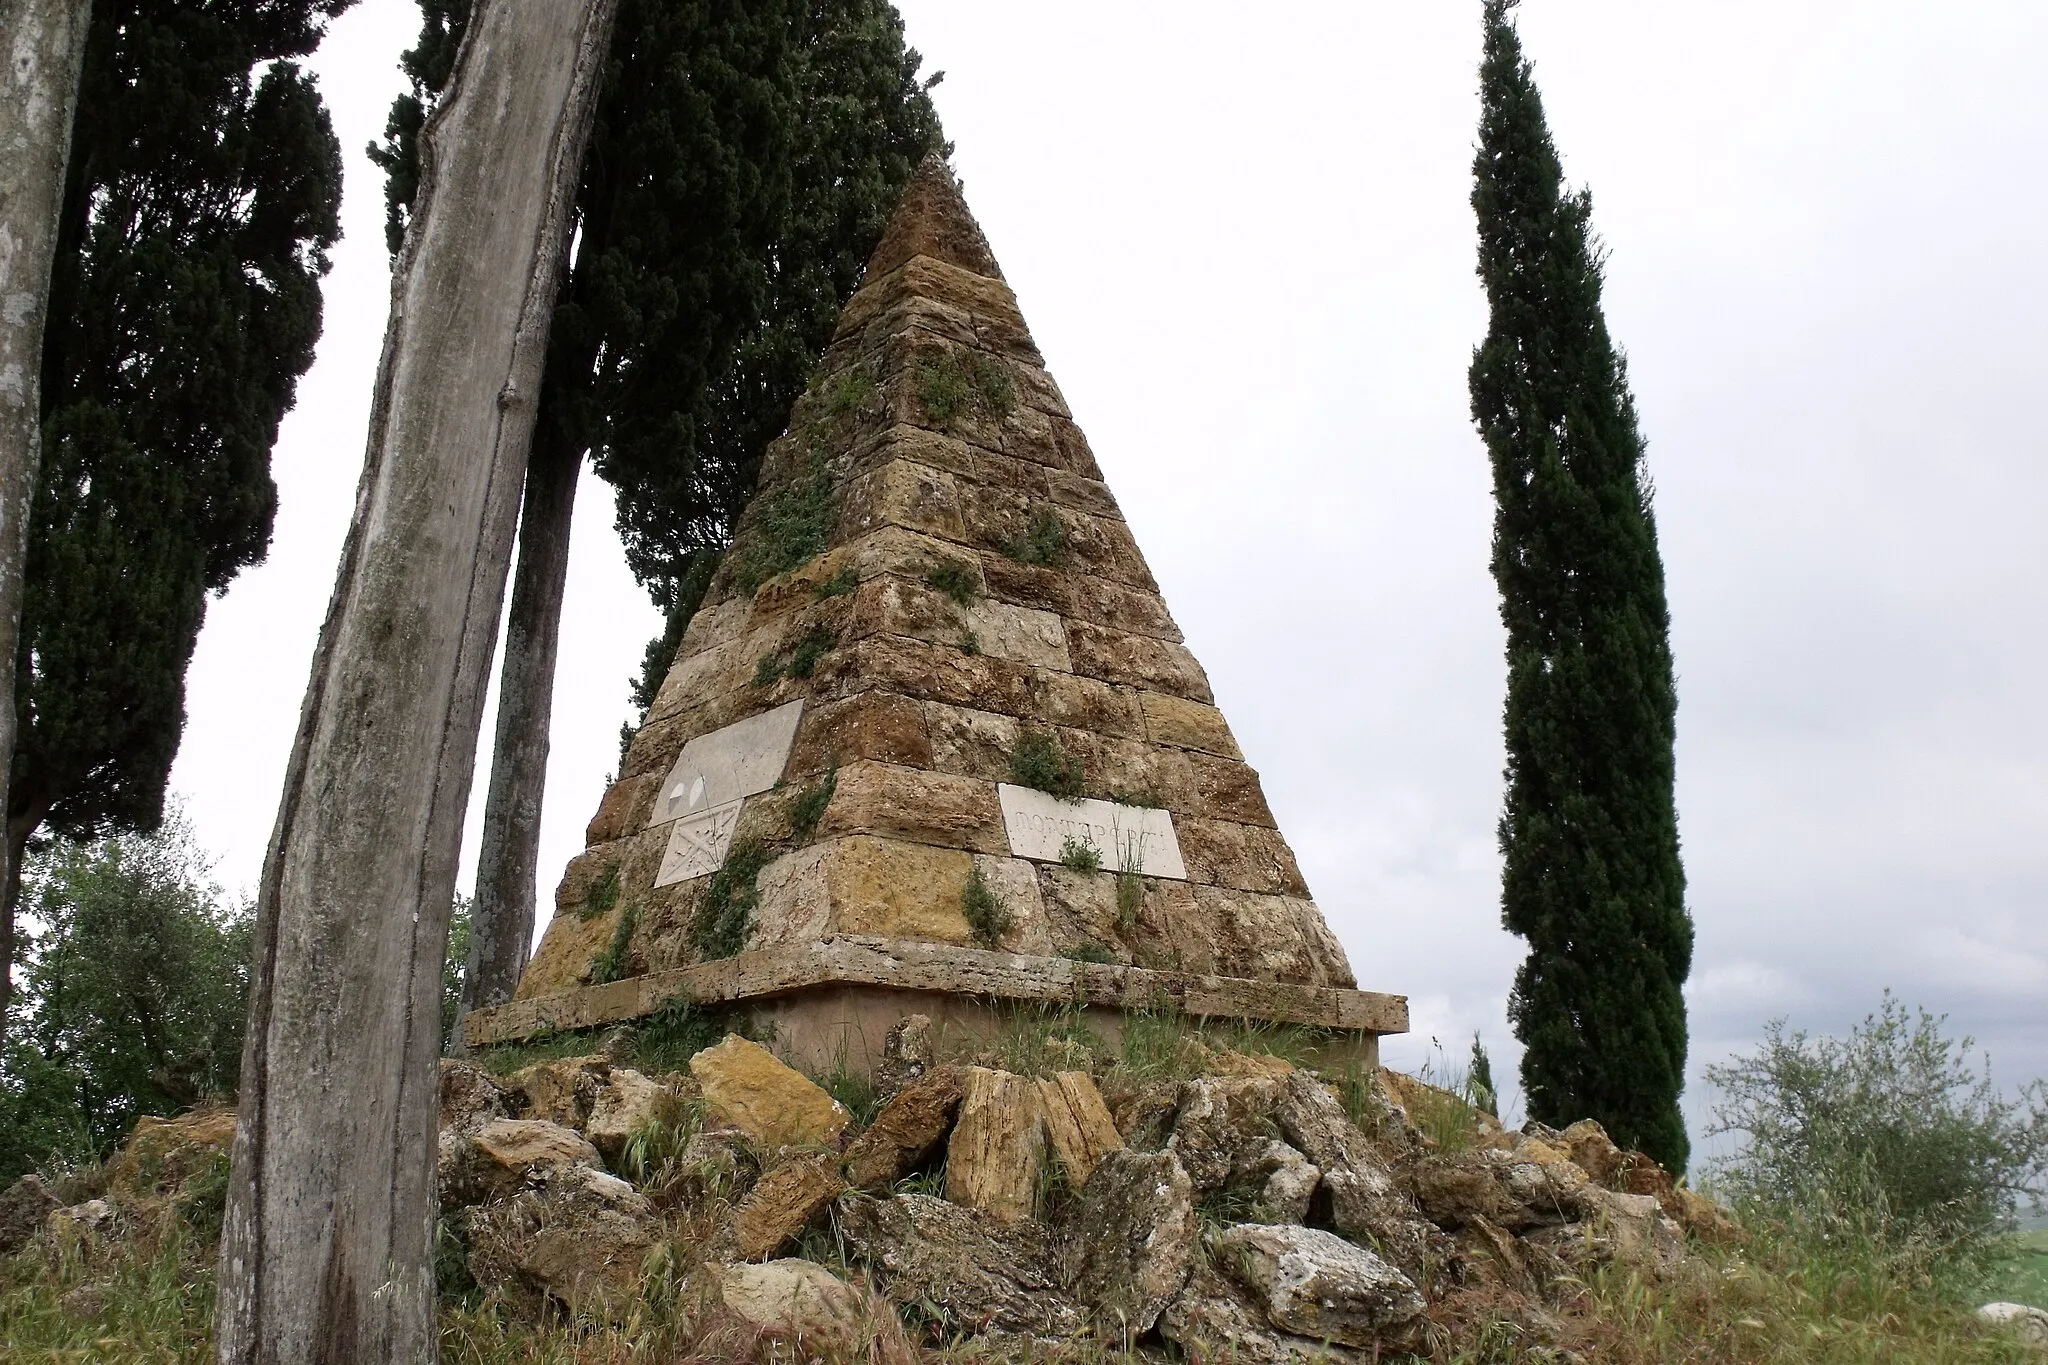 Photo showing: Piramide di Montaperti (Pyramid of Montaperti), War memorial to the battle of Montaperti, near Montaperti (Montapertaccio), Castelnuovo Berardenga, Province of Siena, Tuscany, Italy